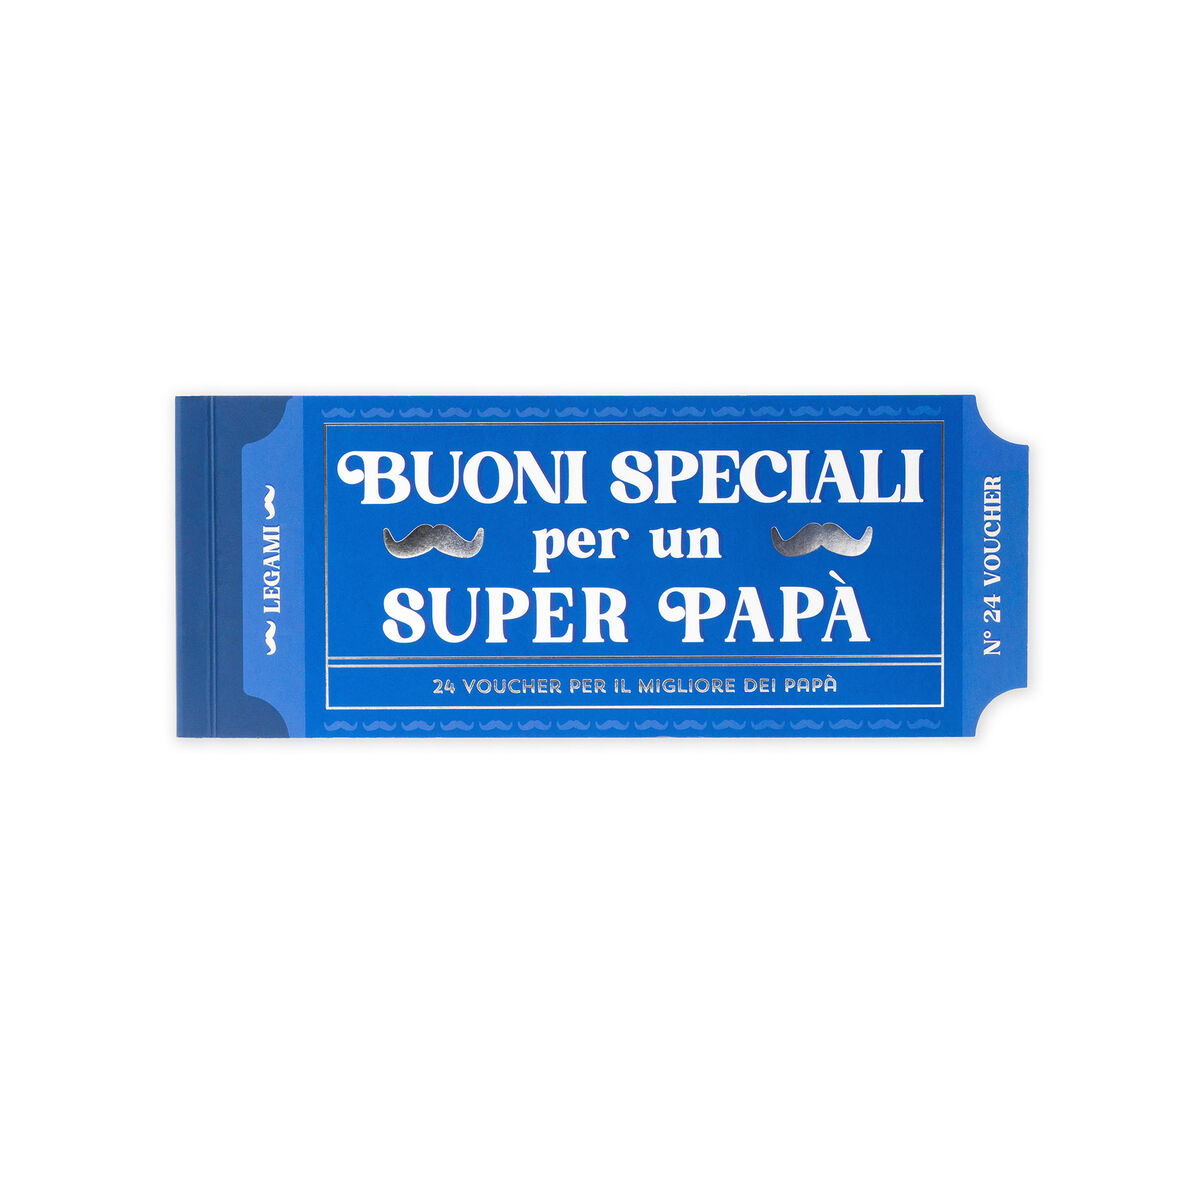 Book of 24 Vouchers for Dads - Italian, , zoo